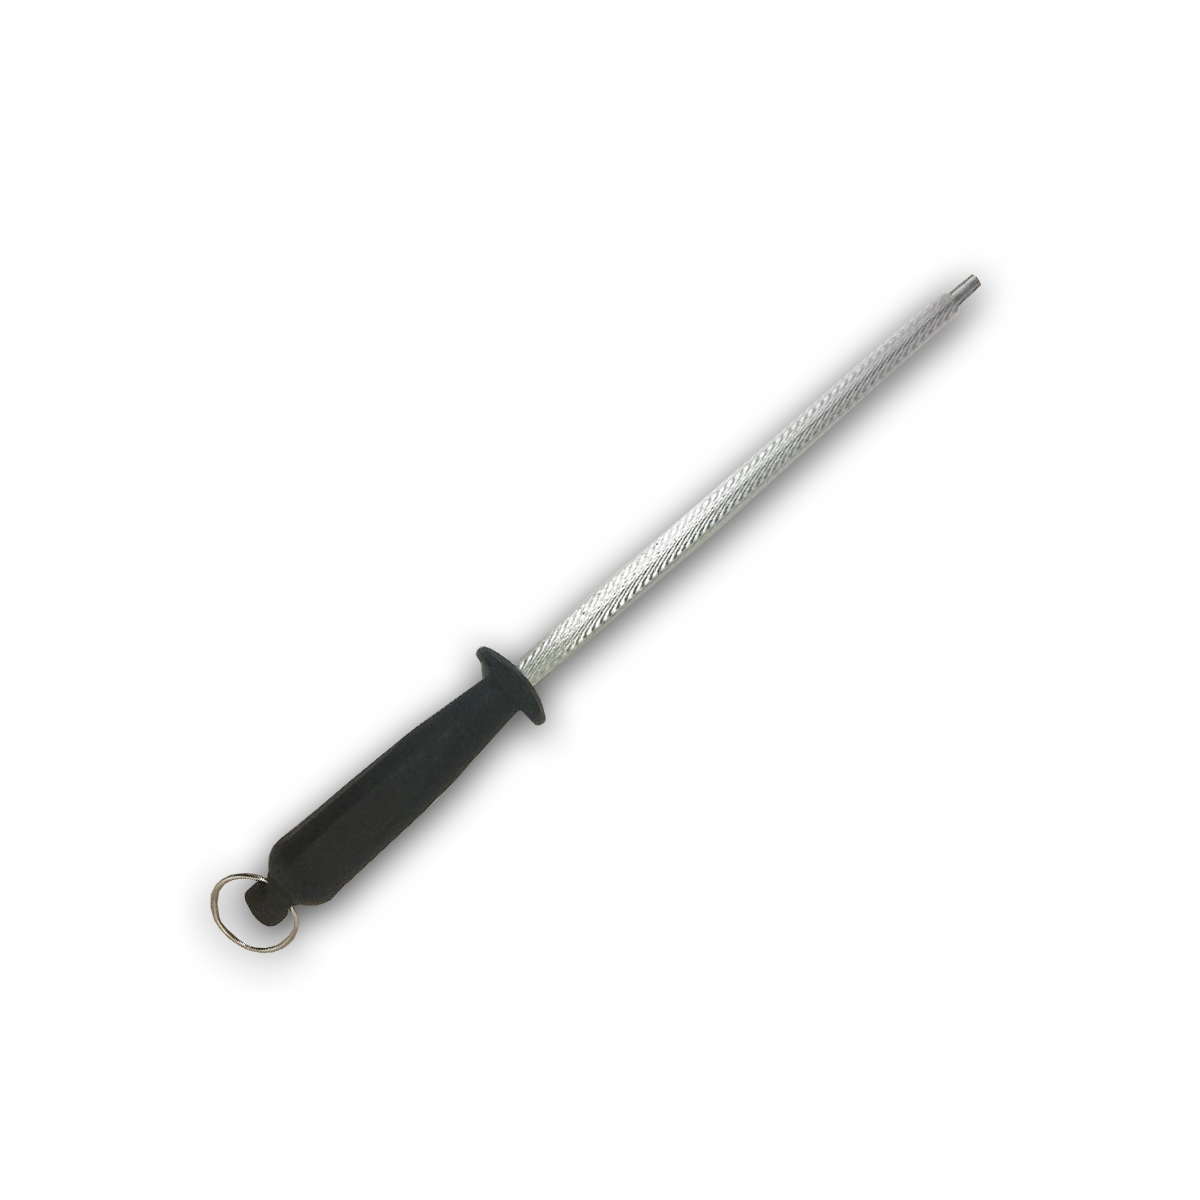 Sharpening Steel Tool For Knives